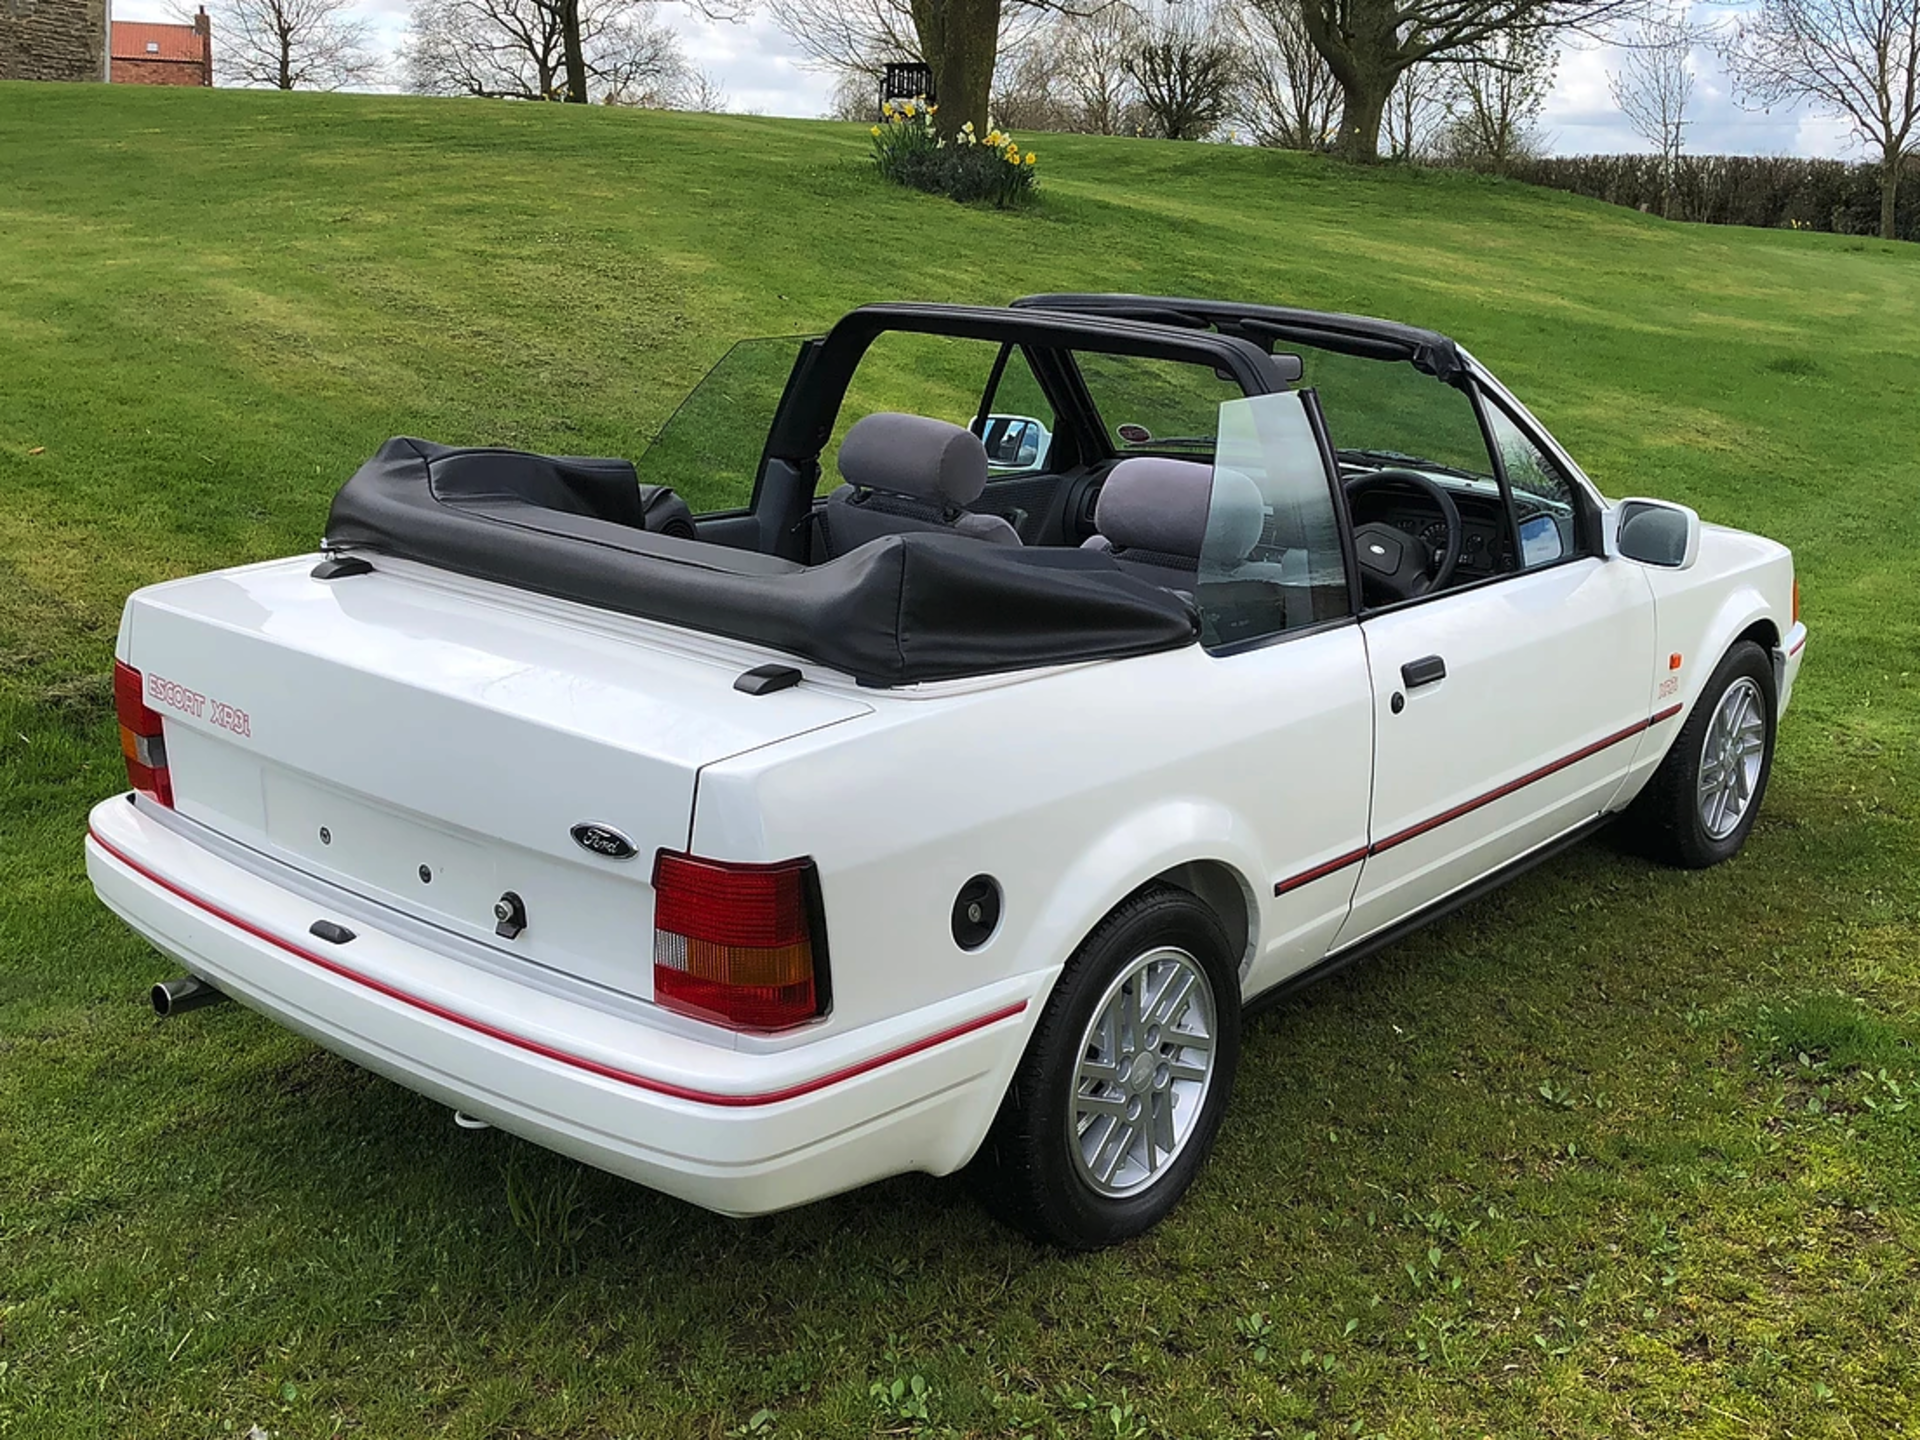 1990 Ford Escort XR3i Convertible - Concours Condition - Image 5 of 12